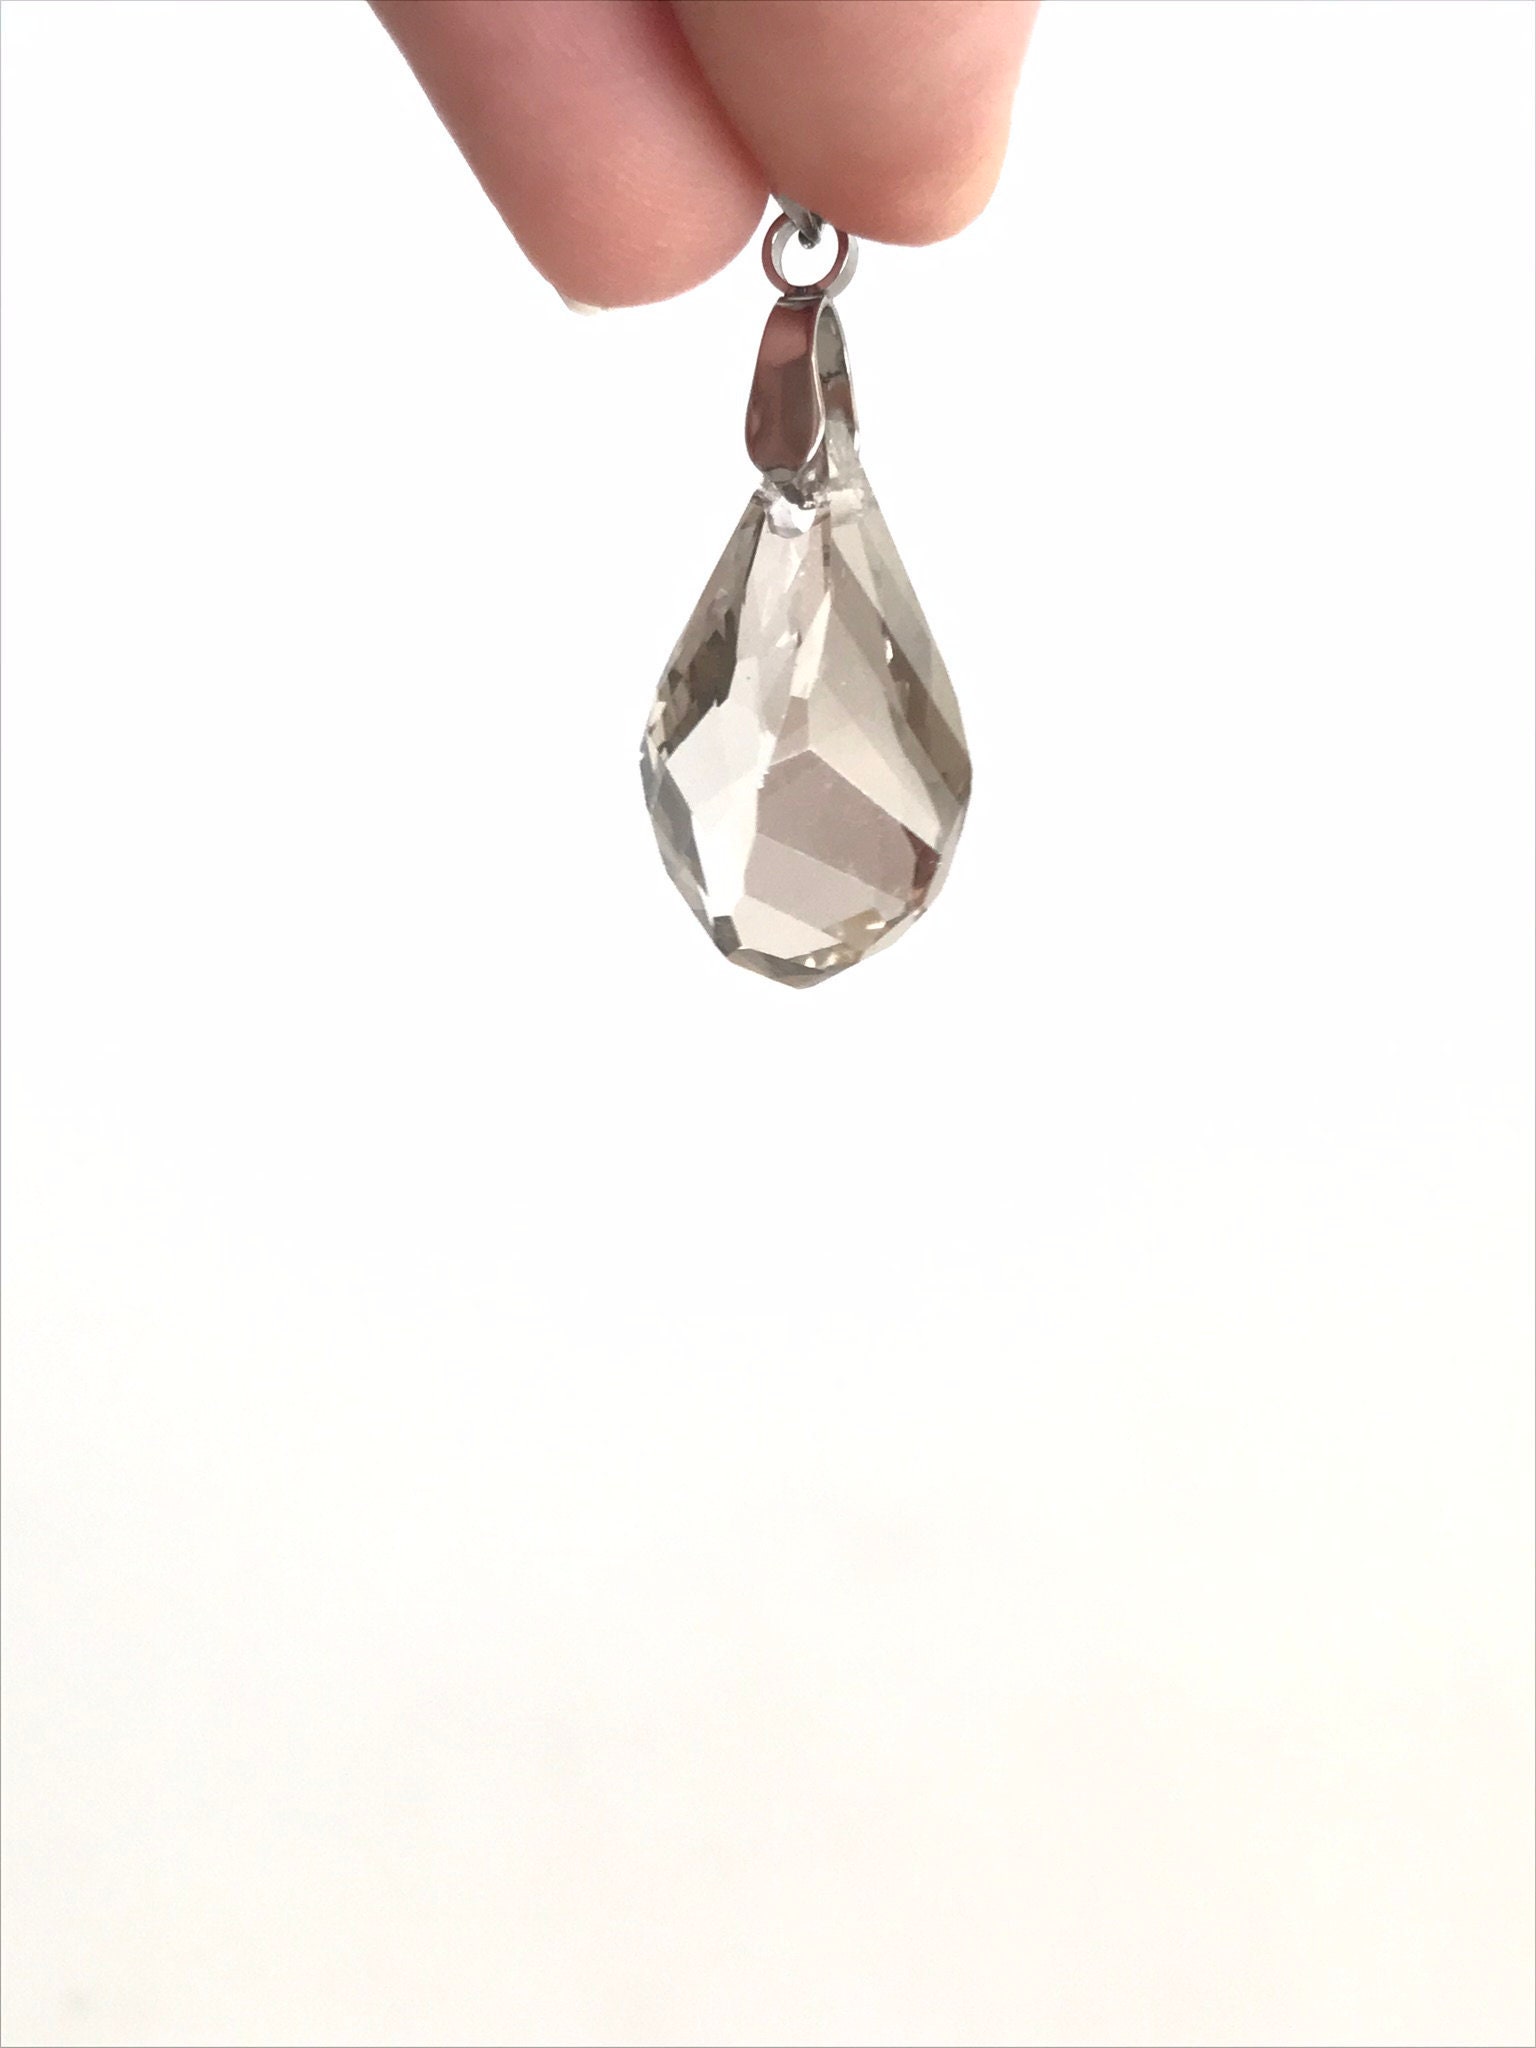 grey crystal 2.2 cm drop shape stone for necklace boho necklace bohemian jewelry Crystal pendant for necklace crystal supplies